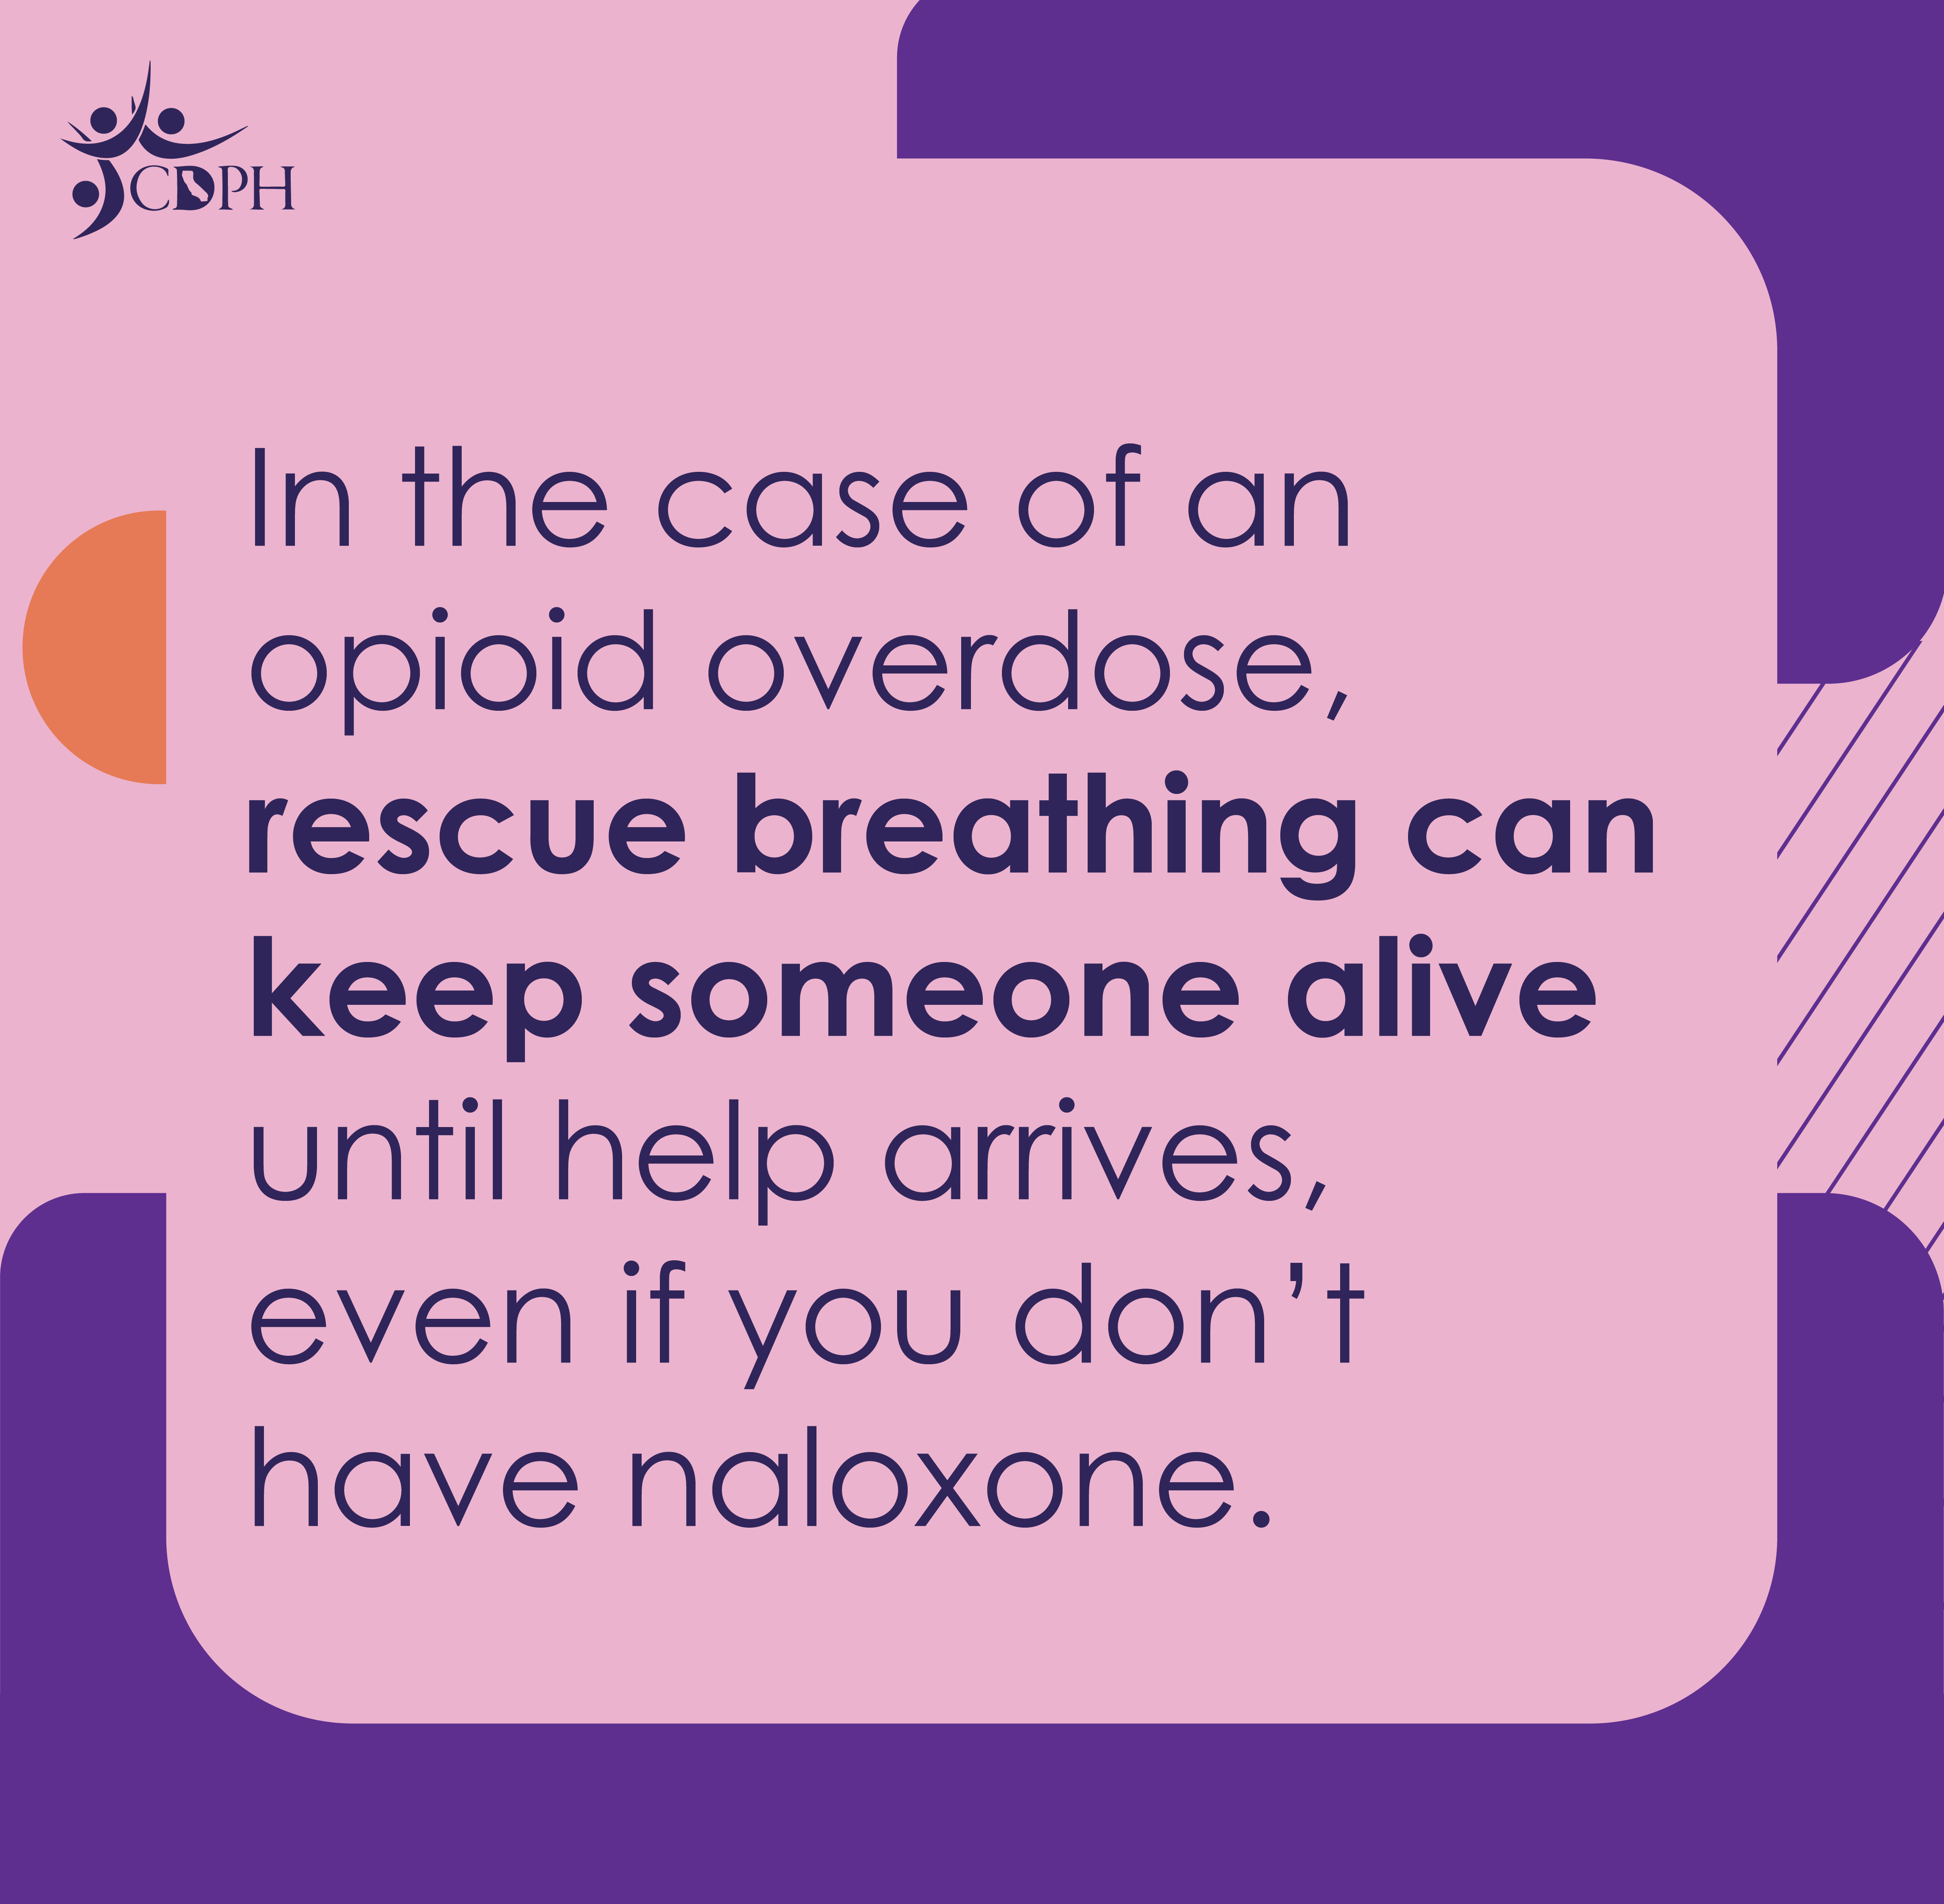 In the case of an opioid overdose, rescue breathing can keep someone alive until help arrives, even if you don't have noloxone